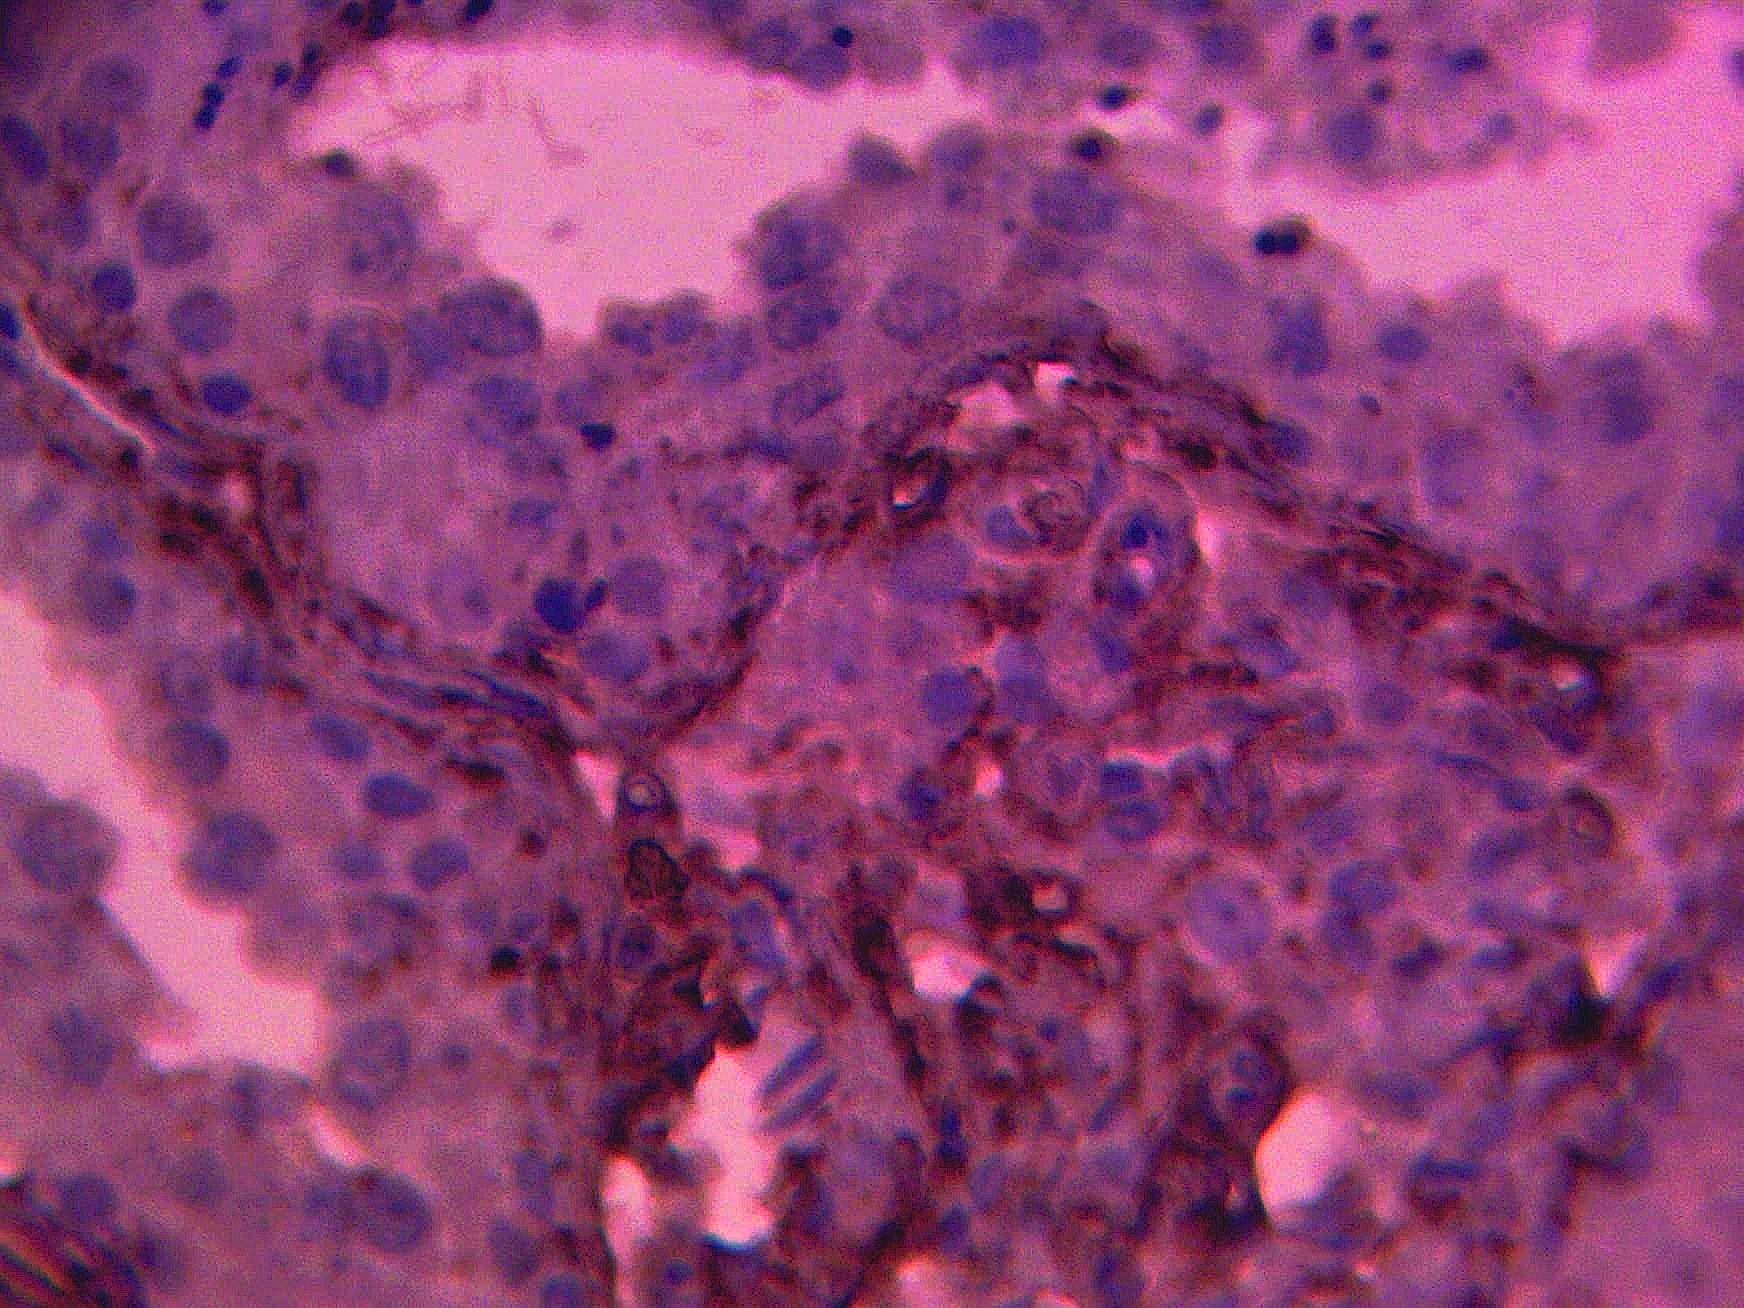 Immunohistochemical staining of normal human testis tissue using ERCC1 antibody (Cat. No. X2734P) at 10 µg/ml and detected using anti-Rabbit HRP secondary antibody and visualized using DAB substrate and hematoxylin counterstain.